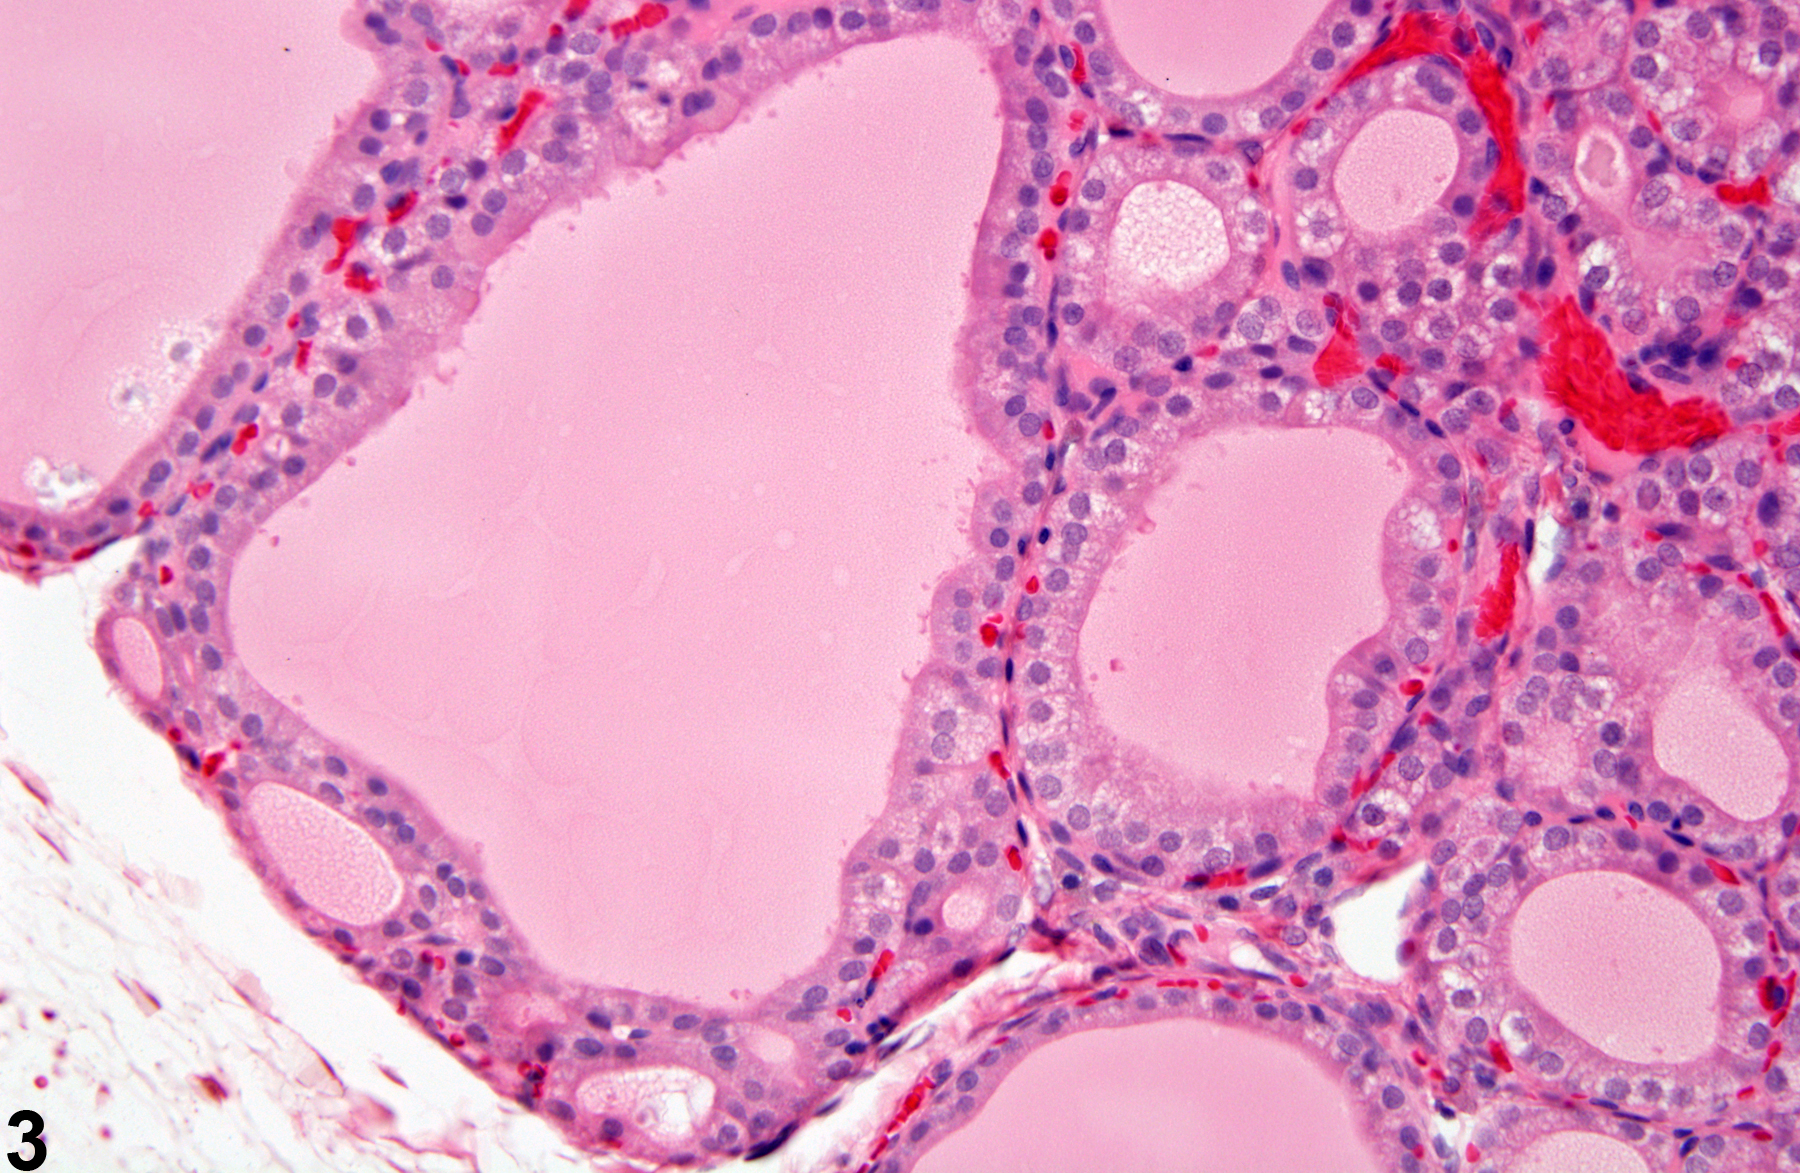 Image of follicular cell hypertrophy in the thyroid gland from a male F344/N rat in a subchronic study